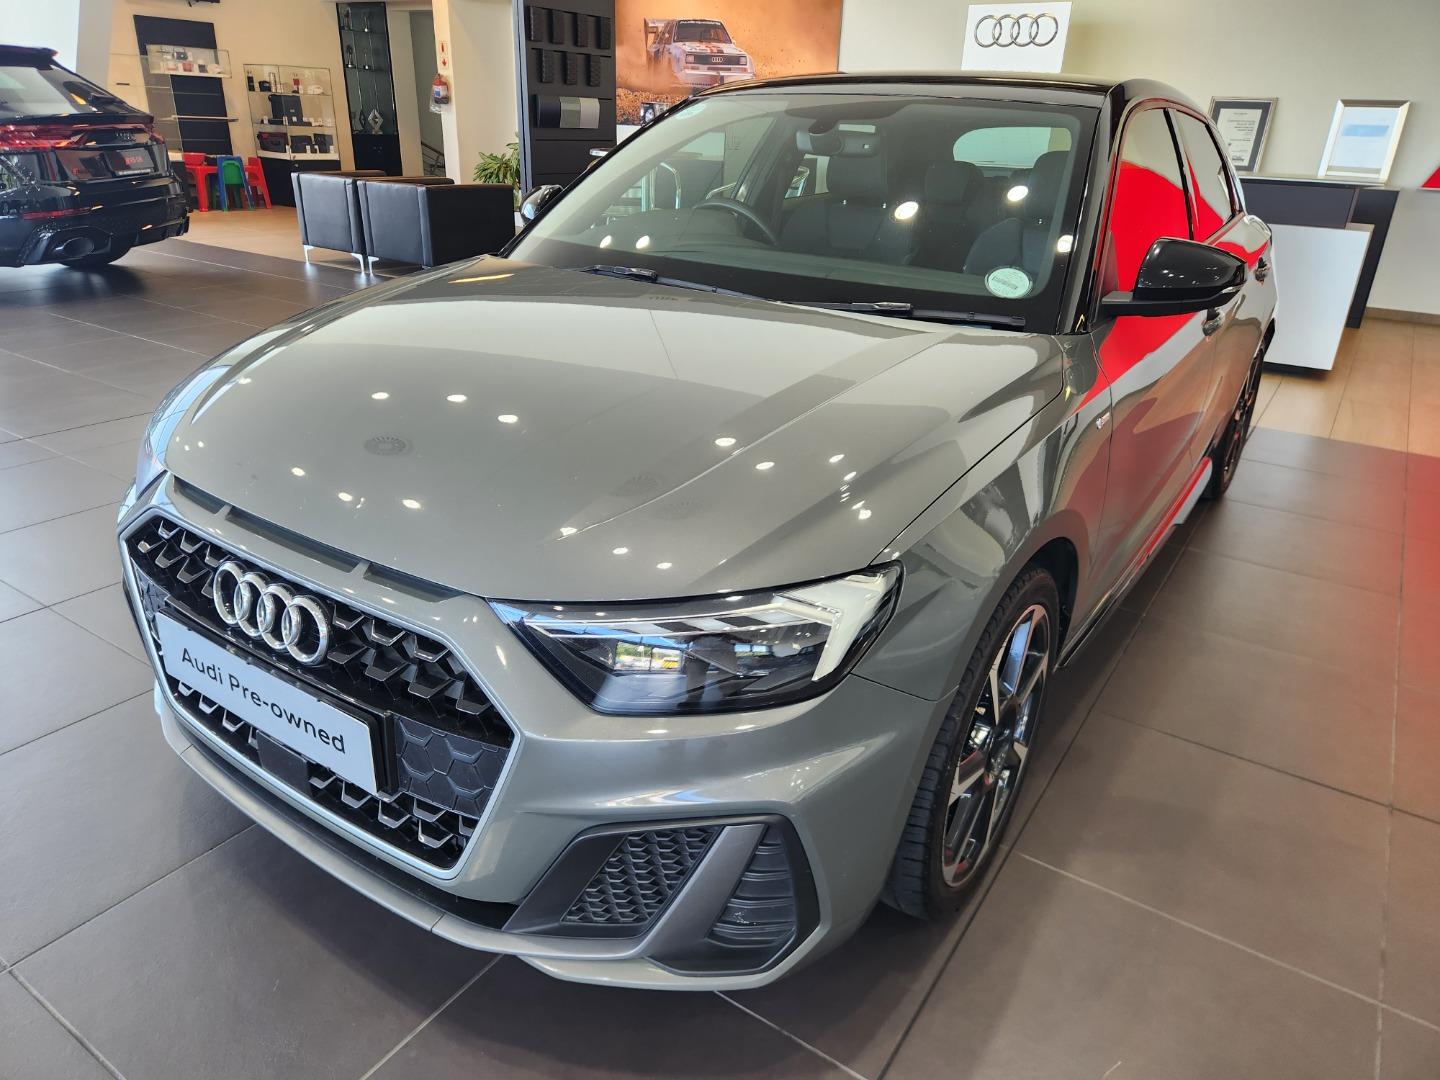 2019 Audi A1  for sale - 44UDA06811